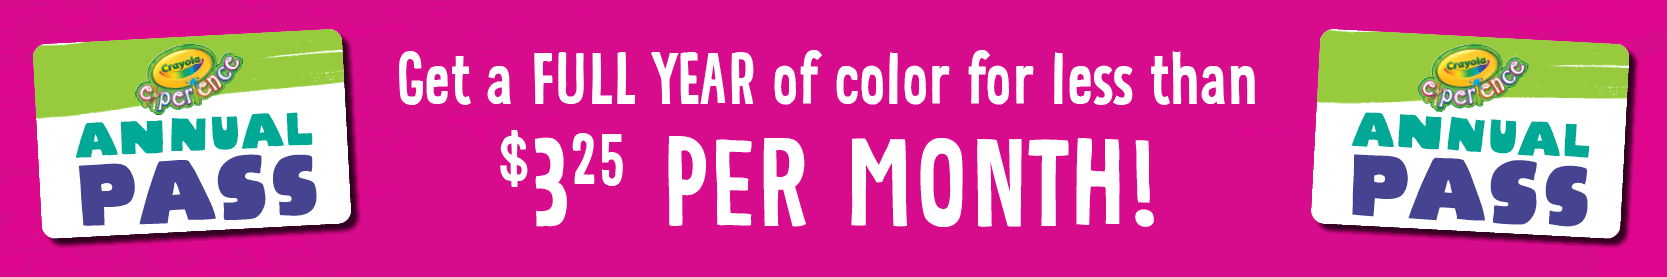 Get a full year of color for less than $3.25 per month with two Annual Passes